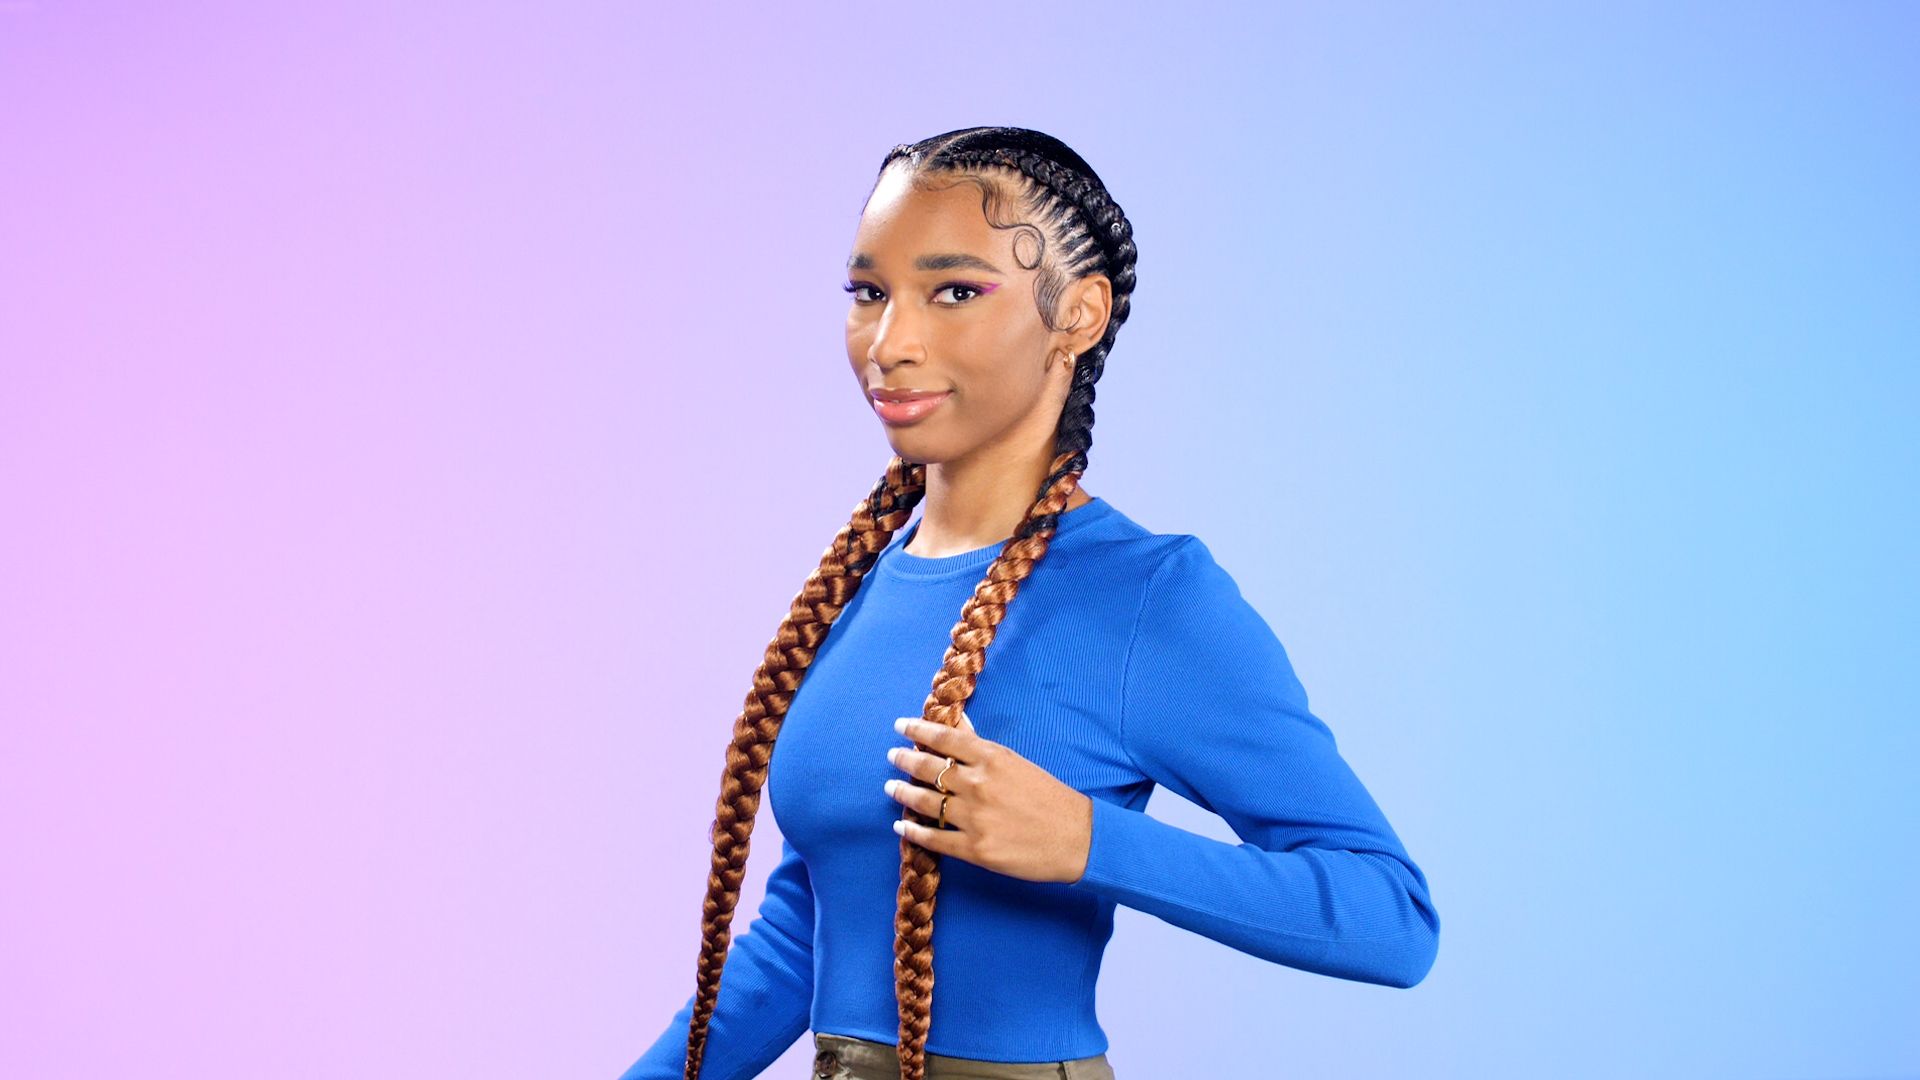 20 stunning tribal braids hairstyles to choose for that revamped look -  YEN.COM.GH